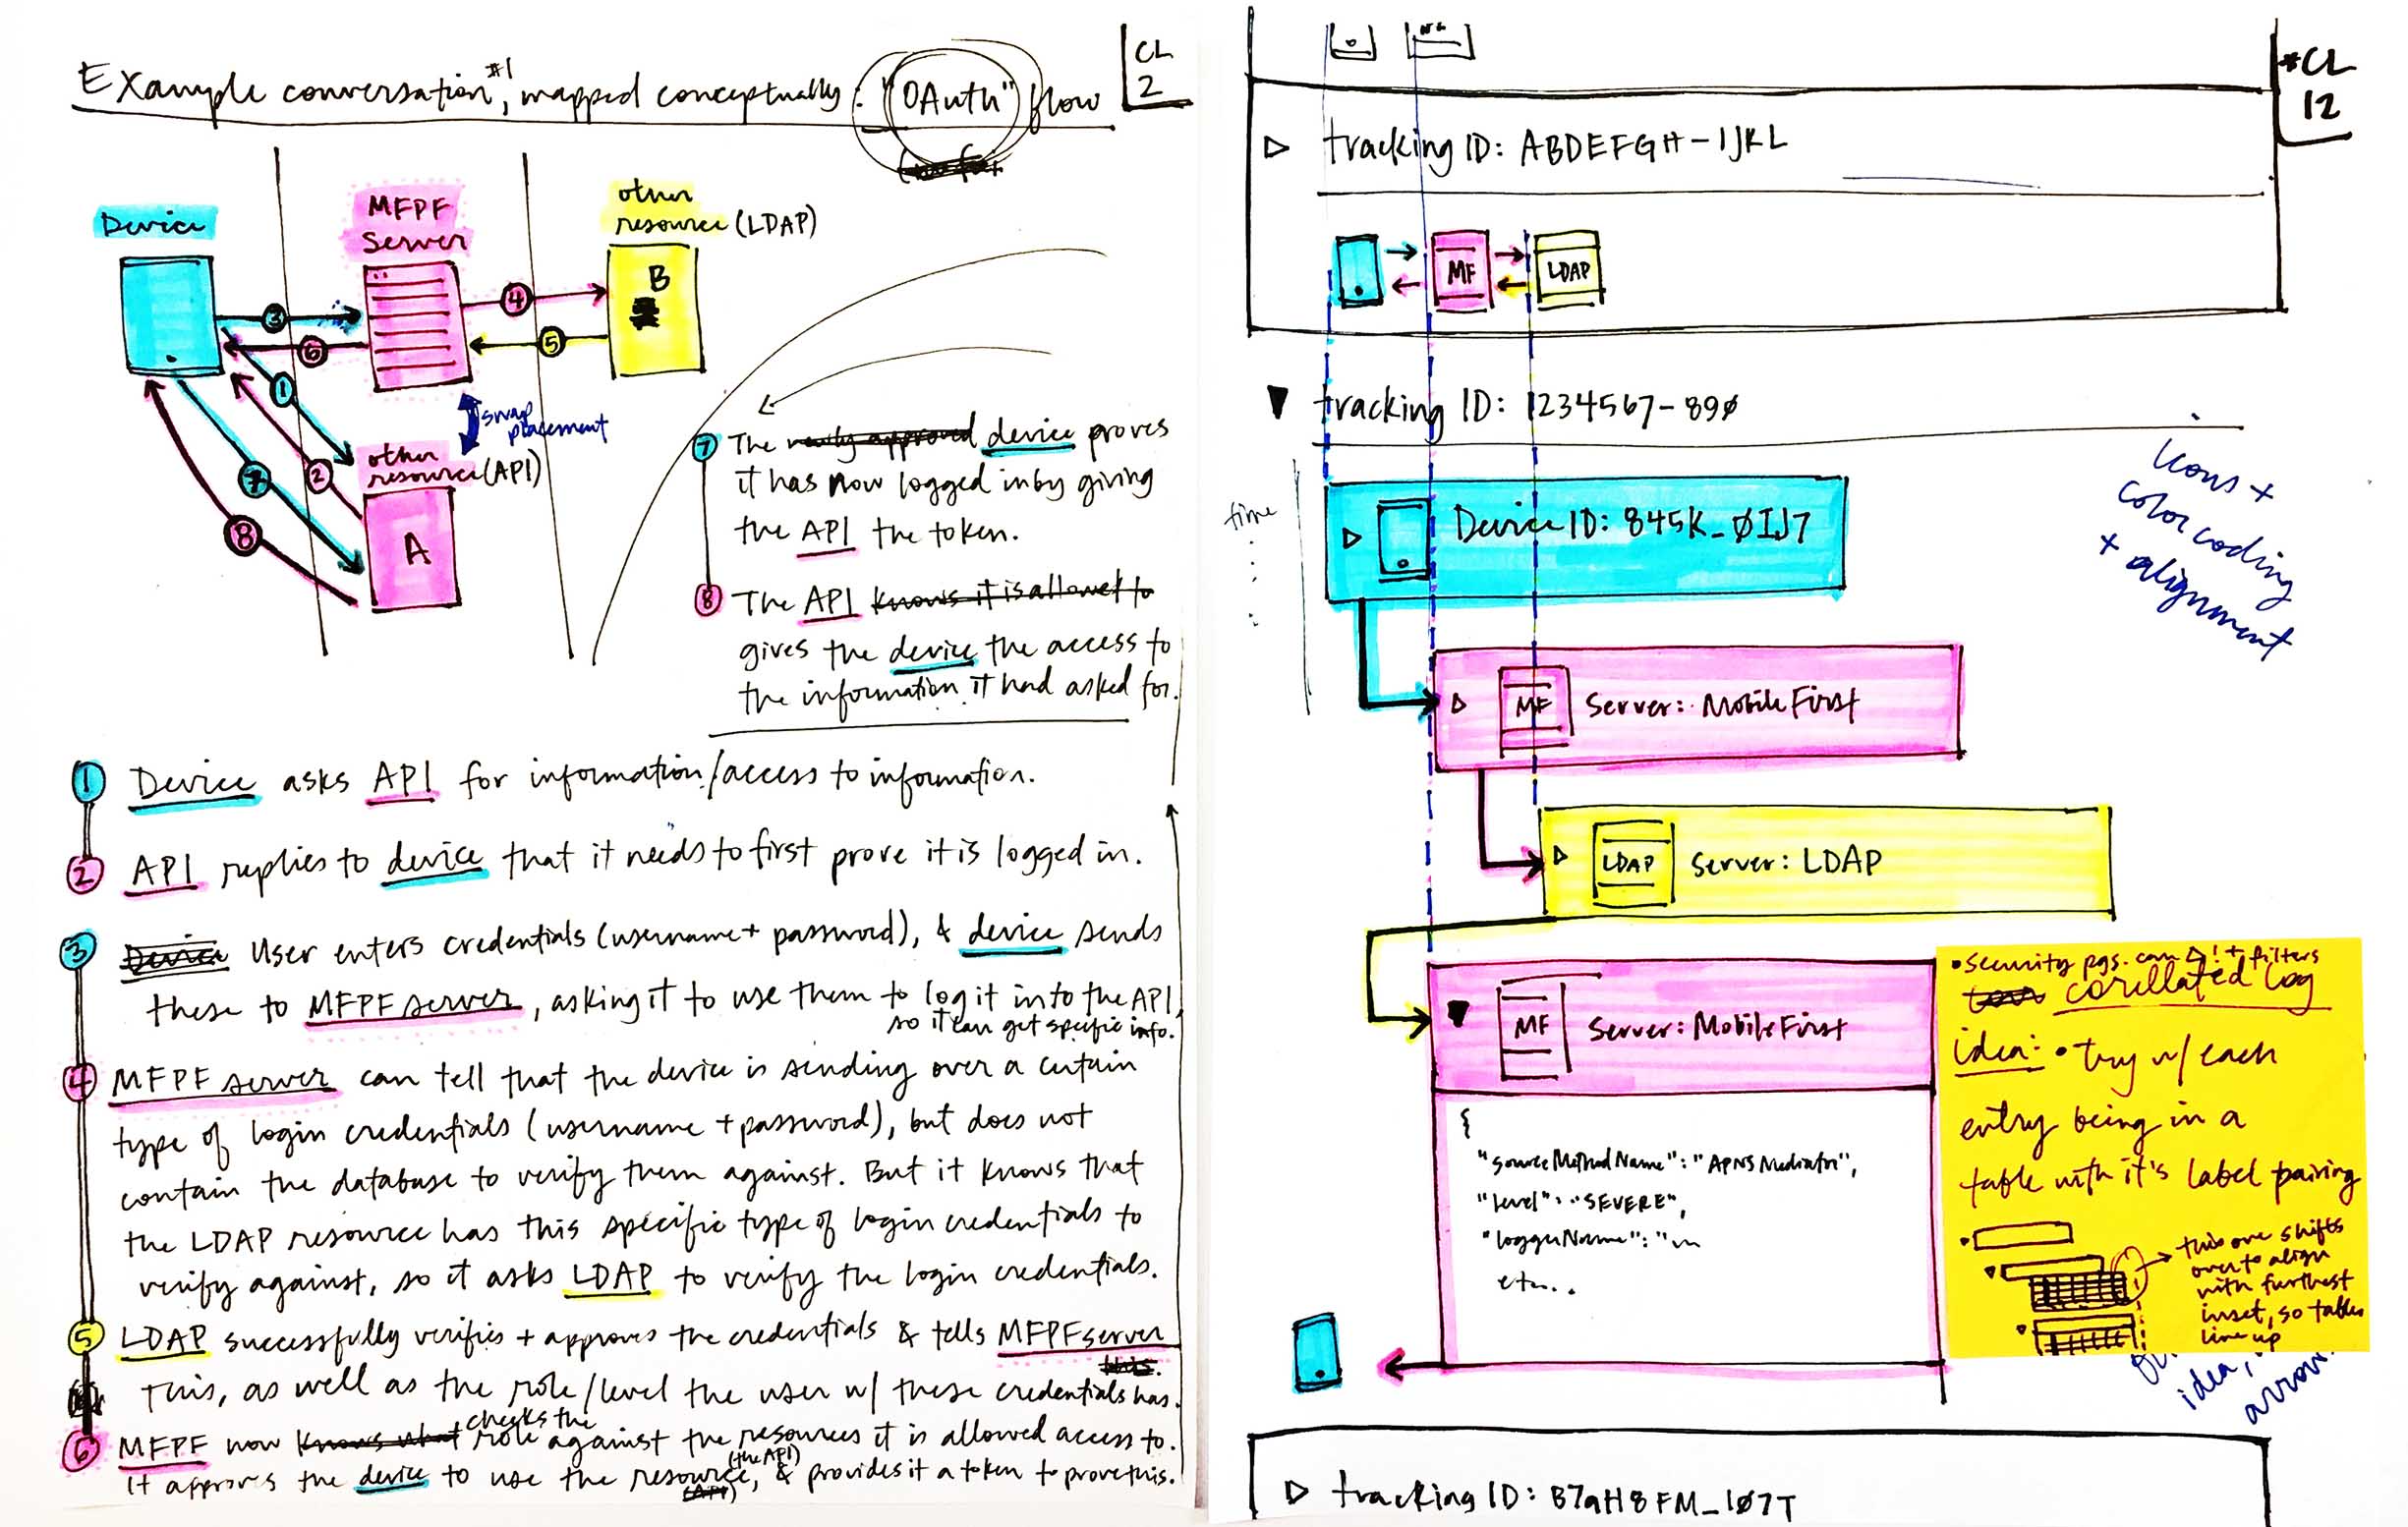 The left sketch diagrams a back-end authentication flow, color-coded with blue, pink, and yellow highlighters. The right sketch maps those colors to a UI to indicate which parts of the back-end flow, data, and APIs affect which parts of the UI.